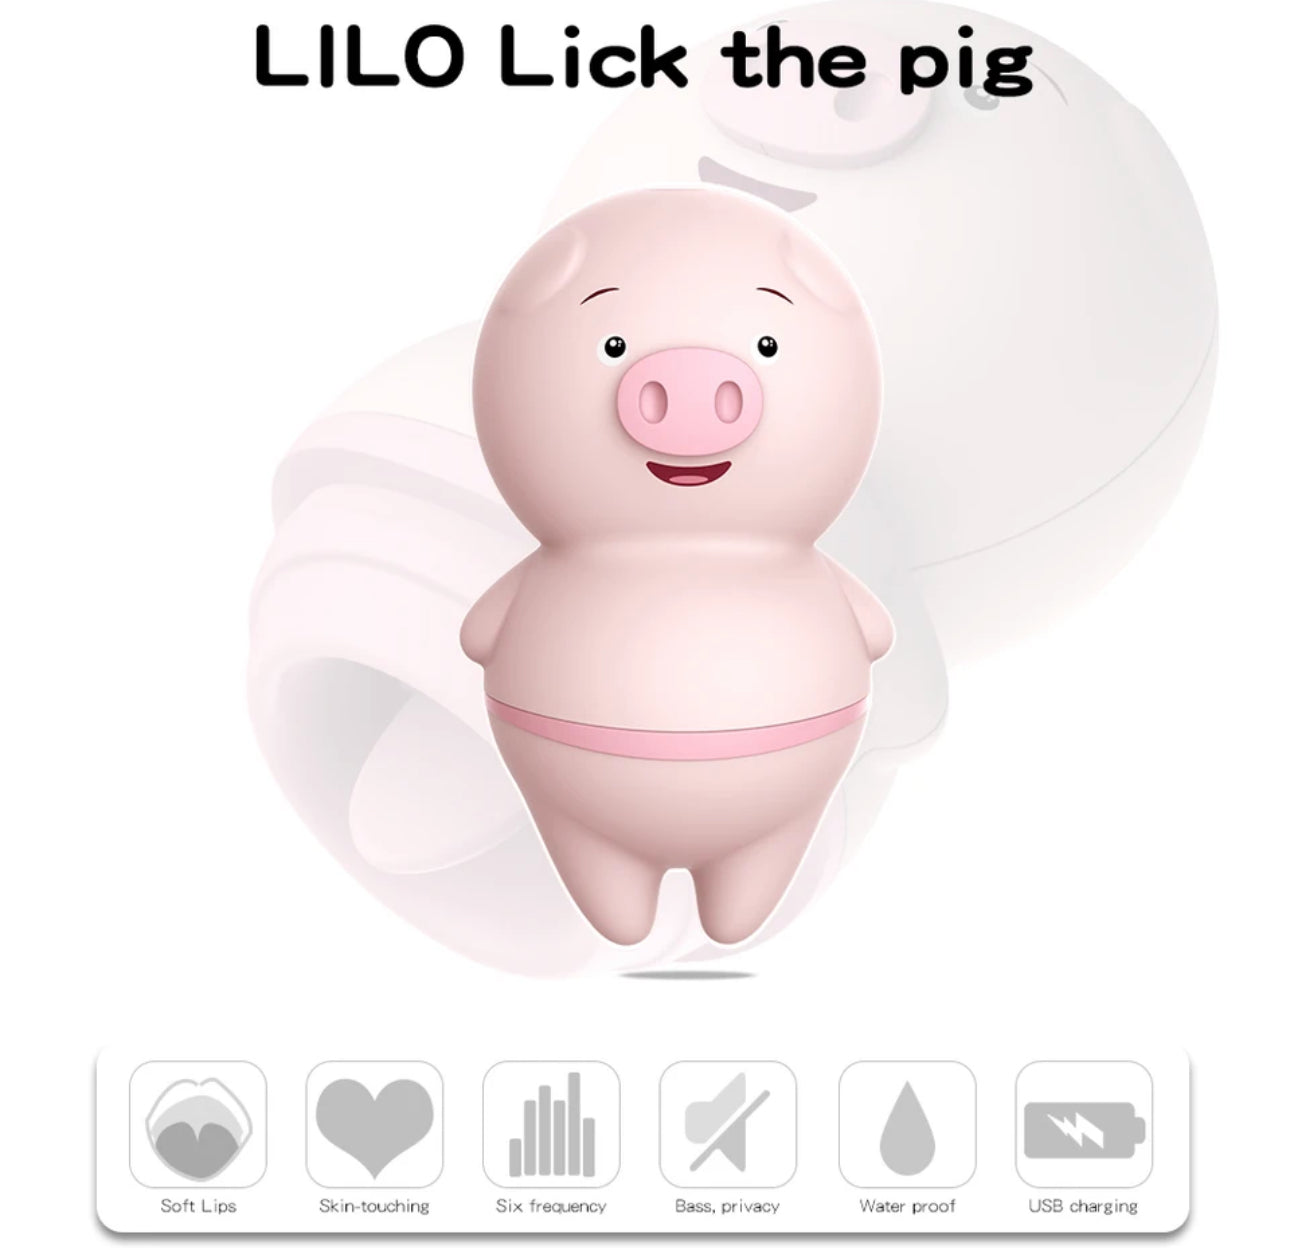 Lilo The Licking Pig